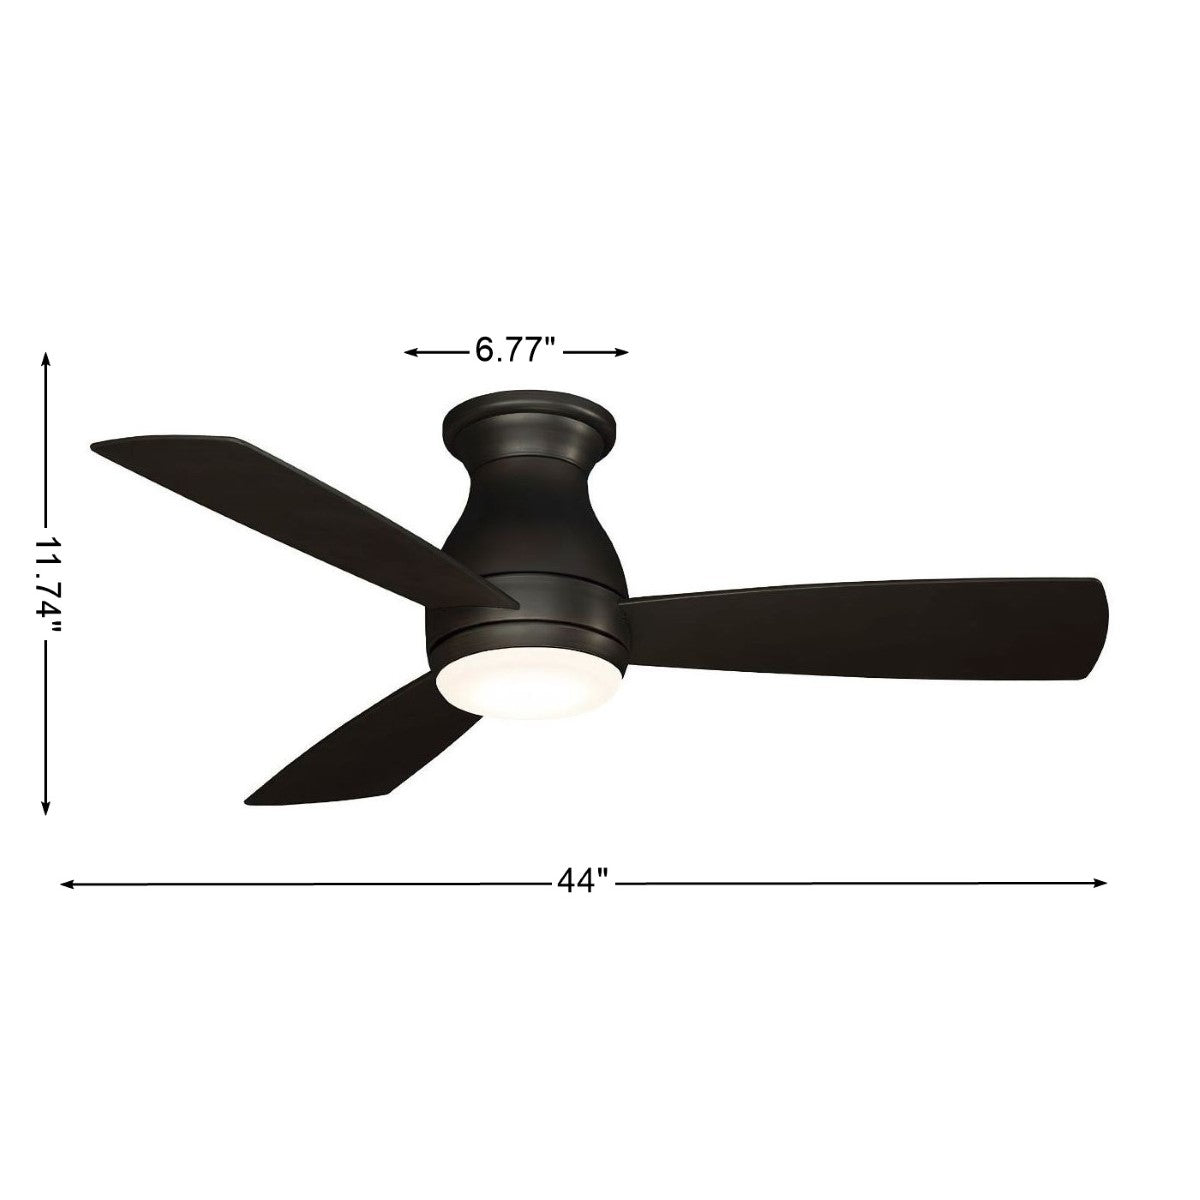 Hugh 44 Inch Modern Outdoor Flush Mount Ceiling Fan With Light And Remote